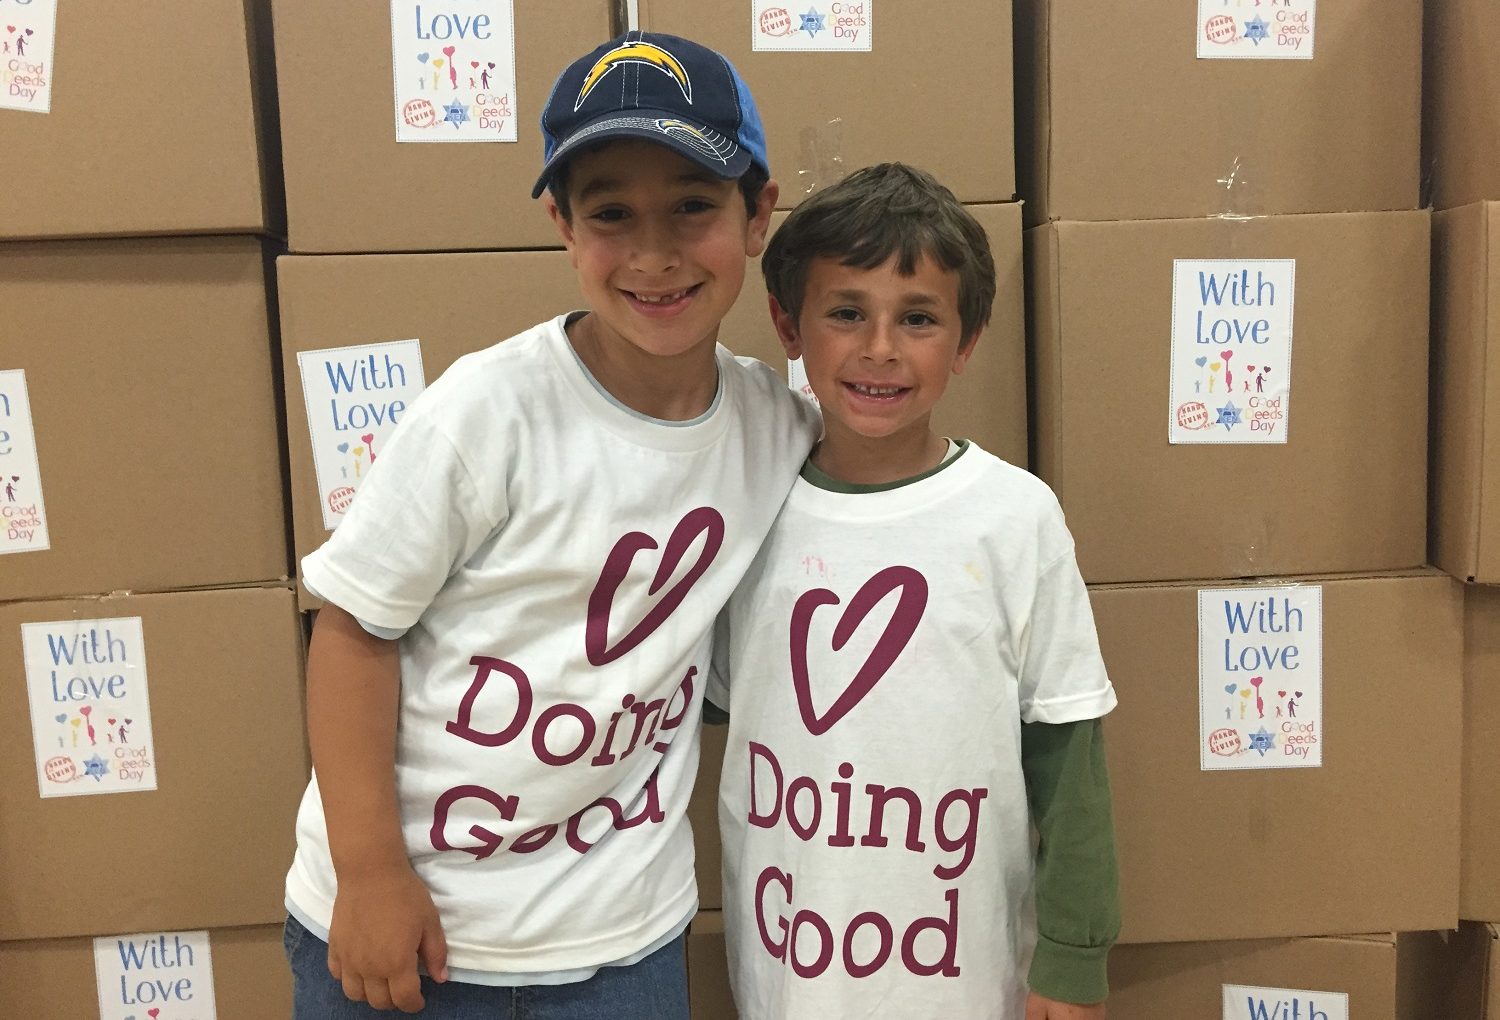 Smiling kids from Ken Jewish Community send boxes of love.